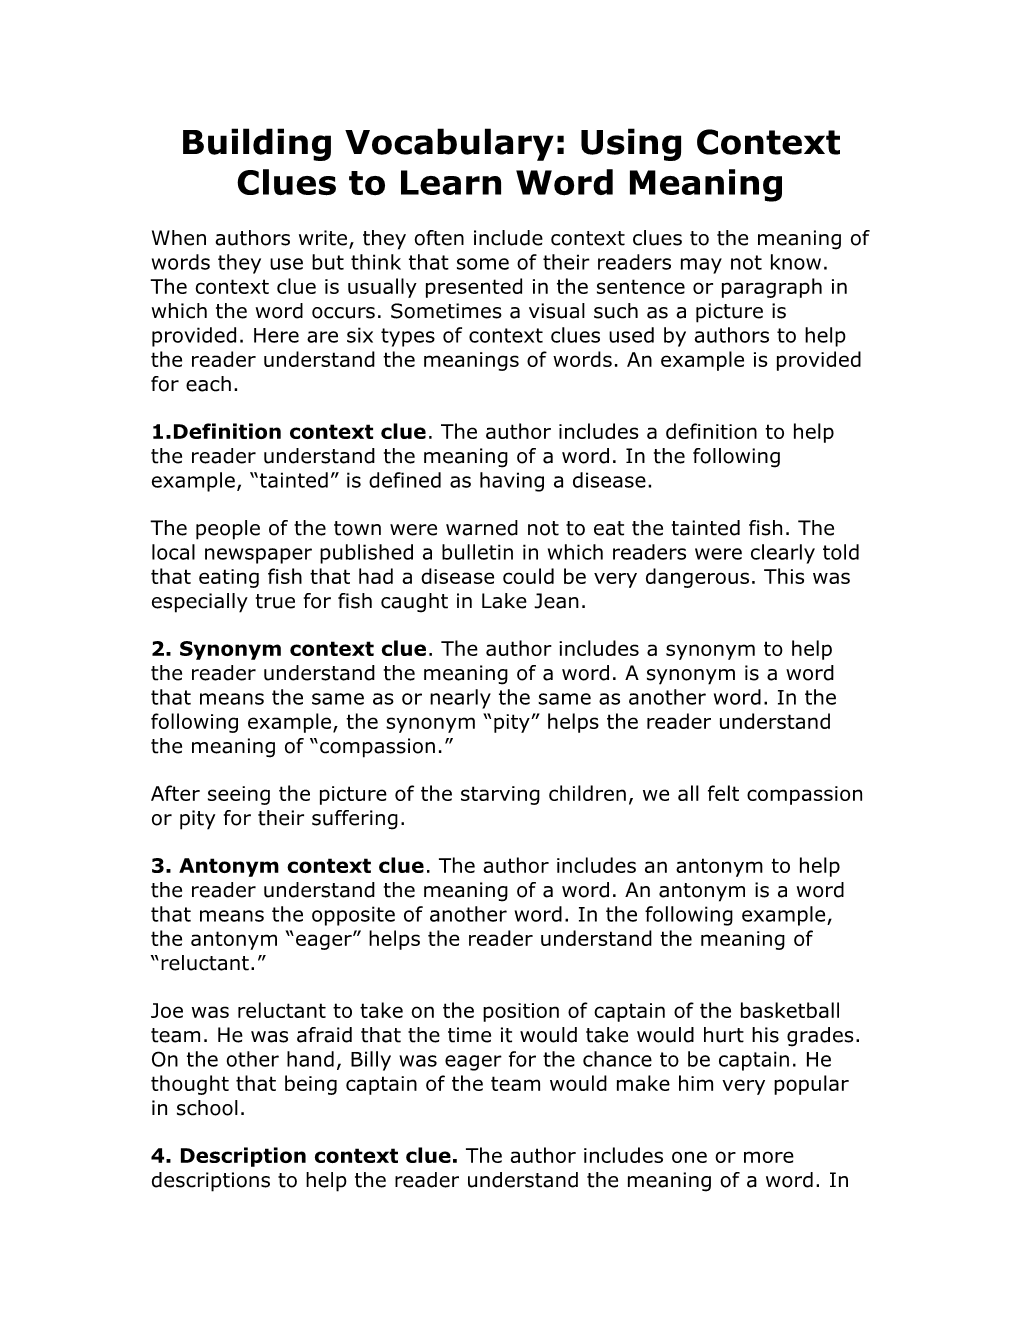 Building Vocabulary: Using Context Clues to Learn Word Meaning